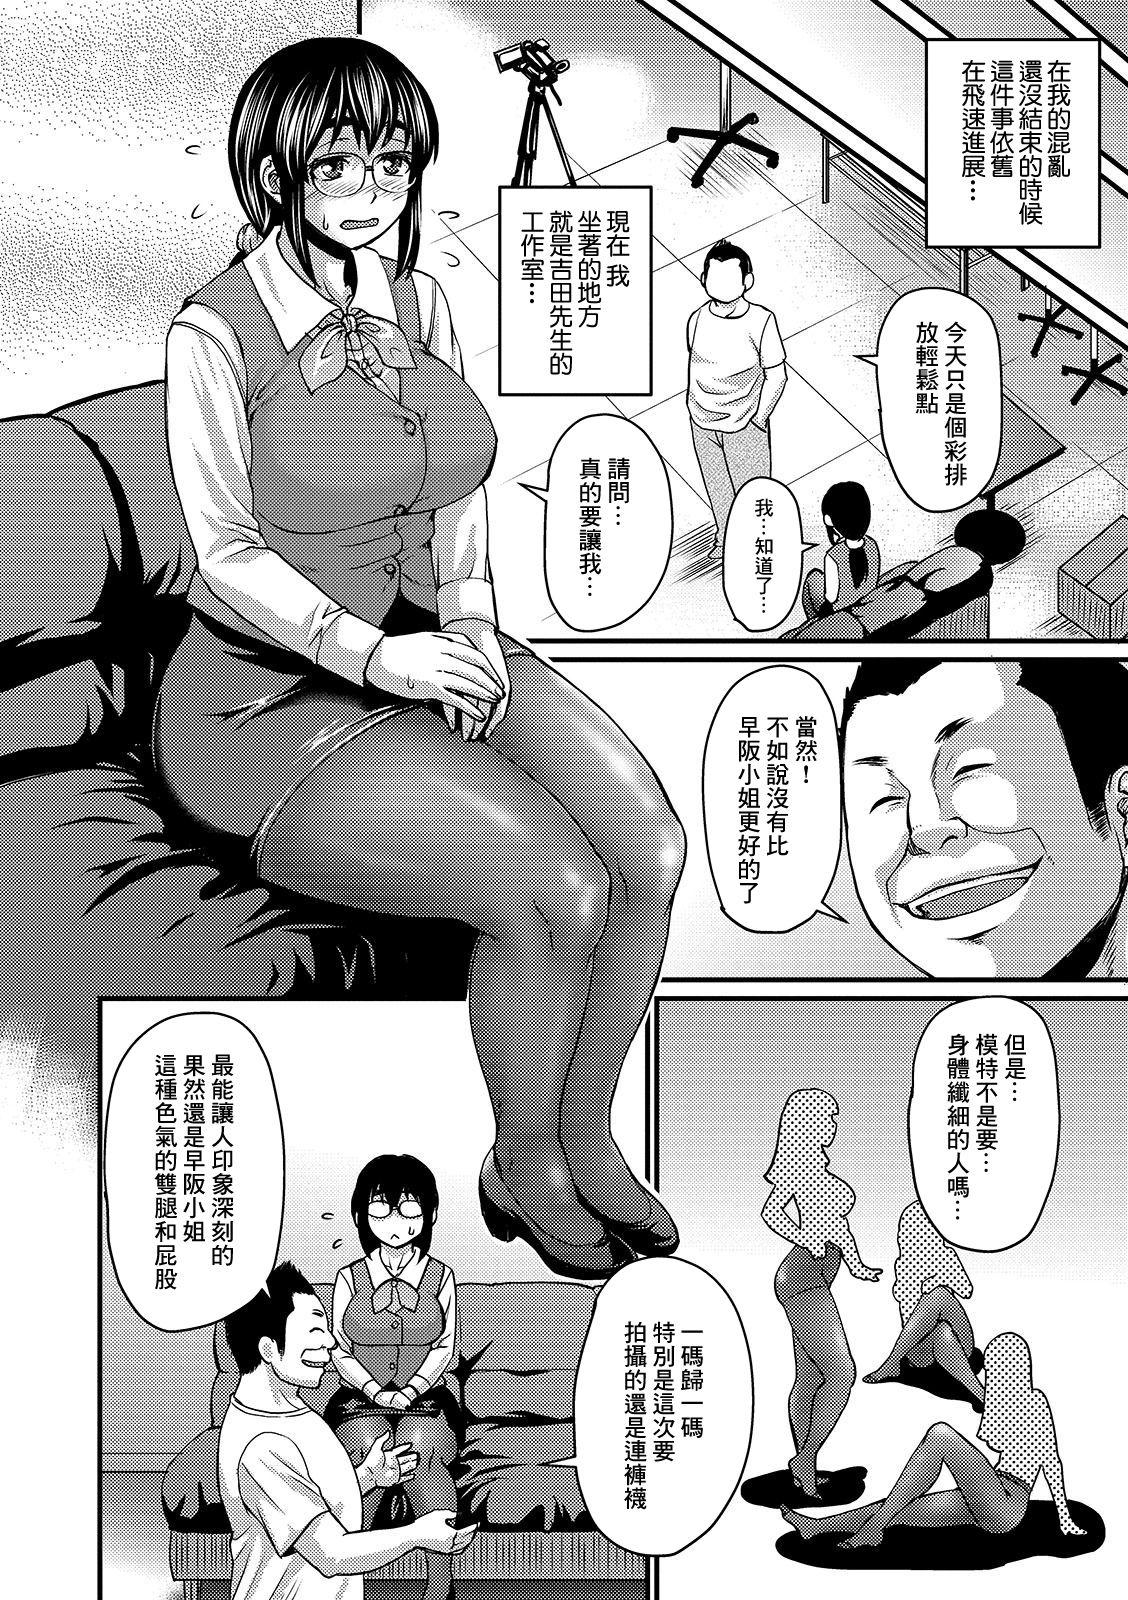 Rough Sex 早坂さんのムチ蒸れパンスト撮影 Monstercock - Page 4